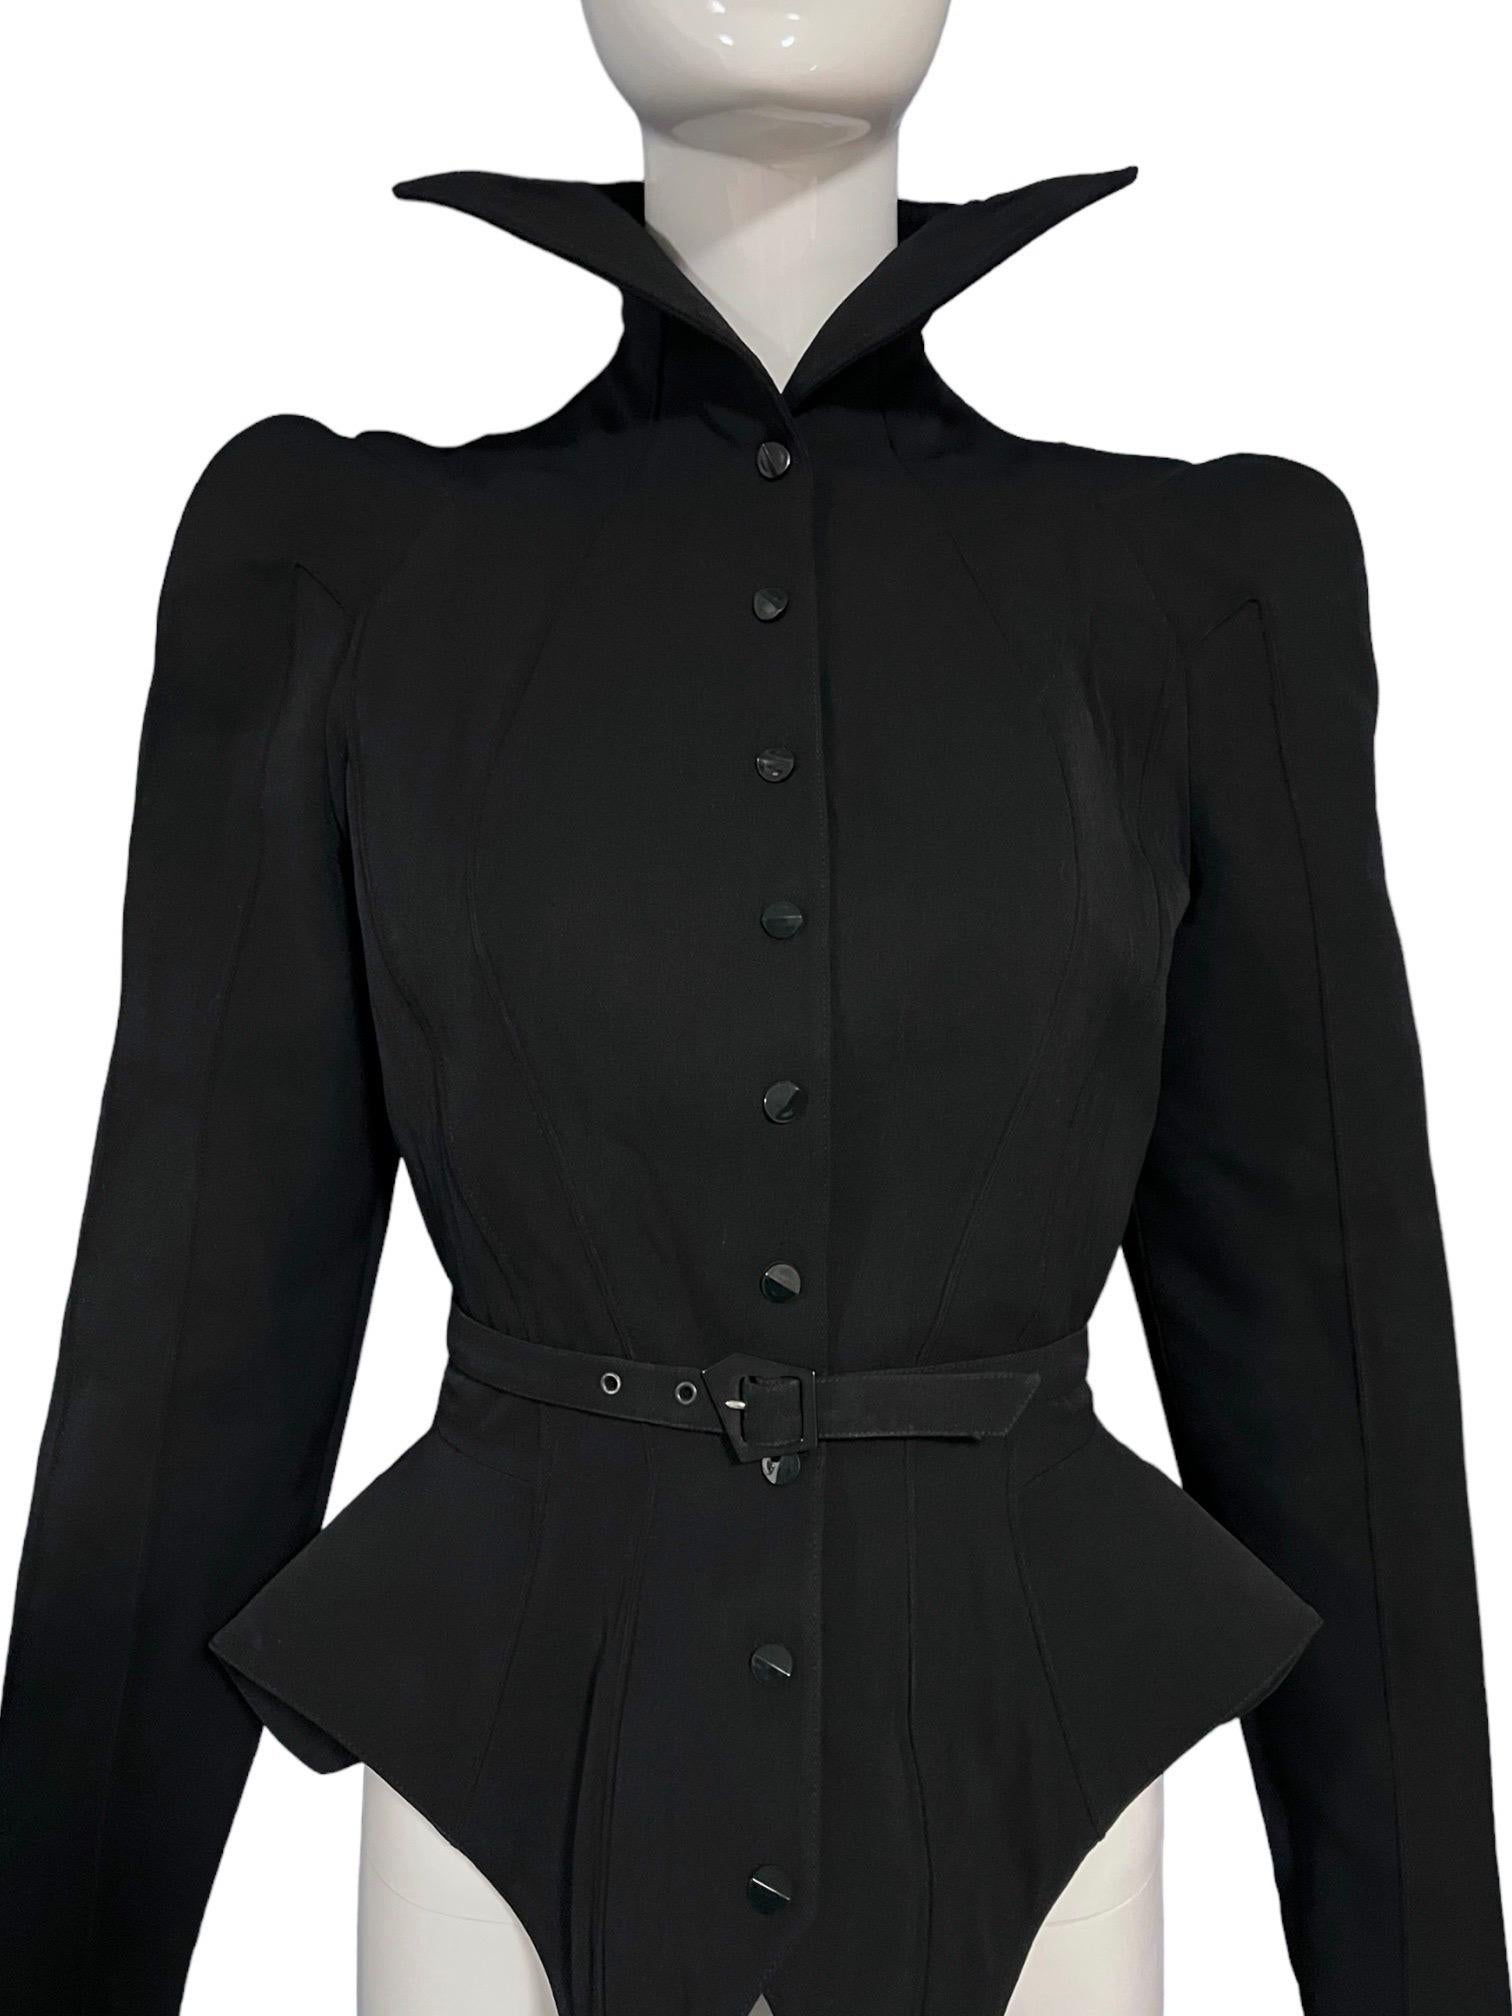 F/W 1988 Thierry Mugler Black Les Infernales Structural Runway Jacket For Sale 5